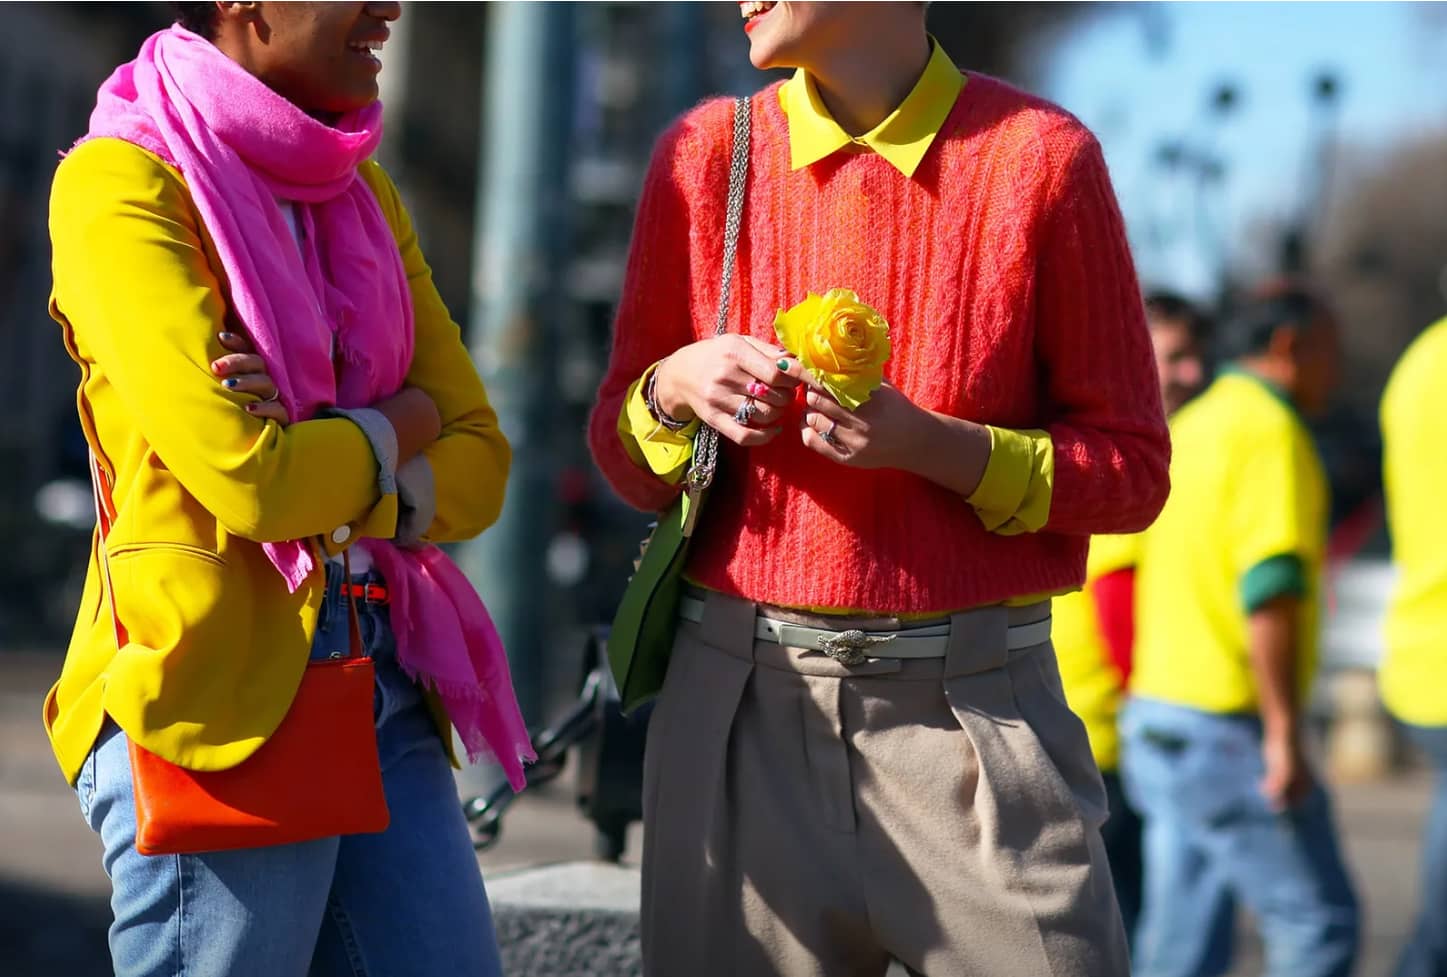 Two people on the street at Colville Spring 21.  We see their mid-frame where one wears a yellow shirt with an red jumper over it and holding a yellow flower. The second person wears a yellow jacket with a red bag and pink scarf.